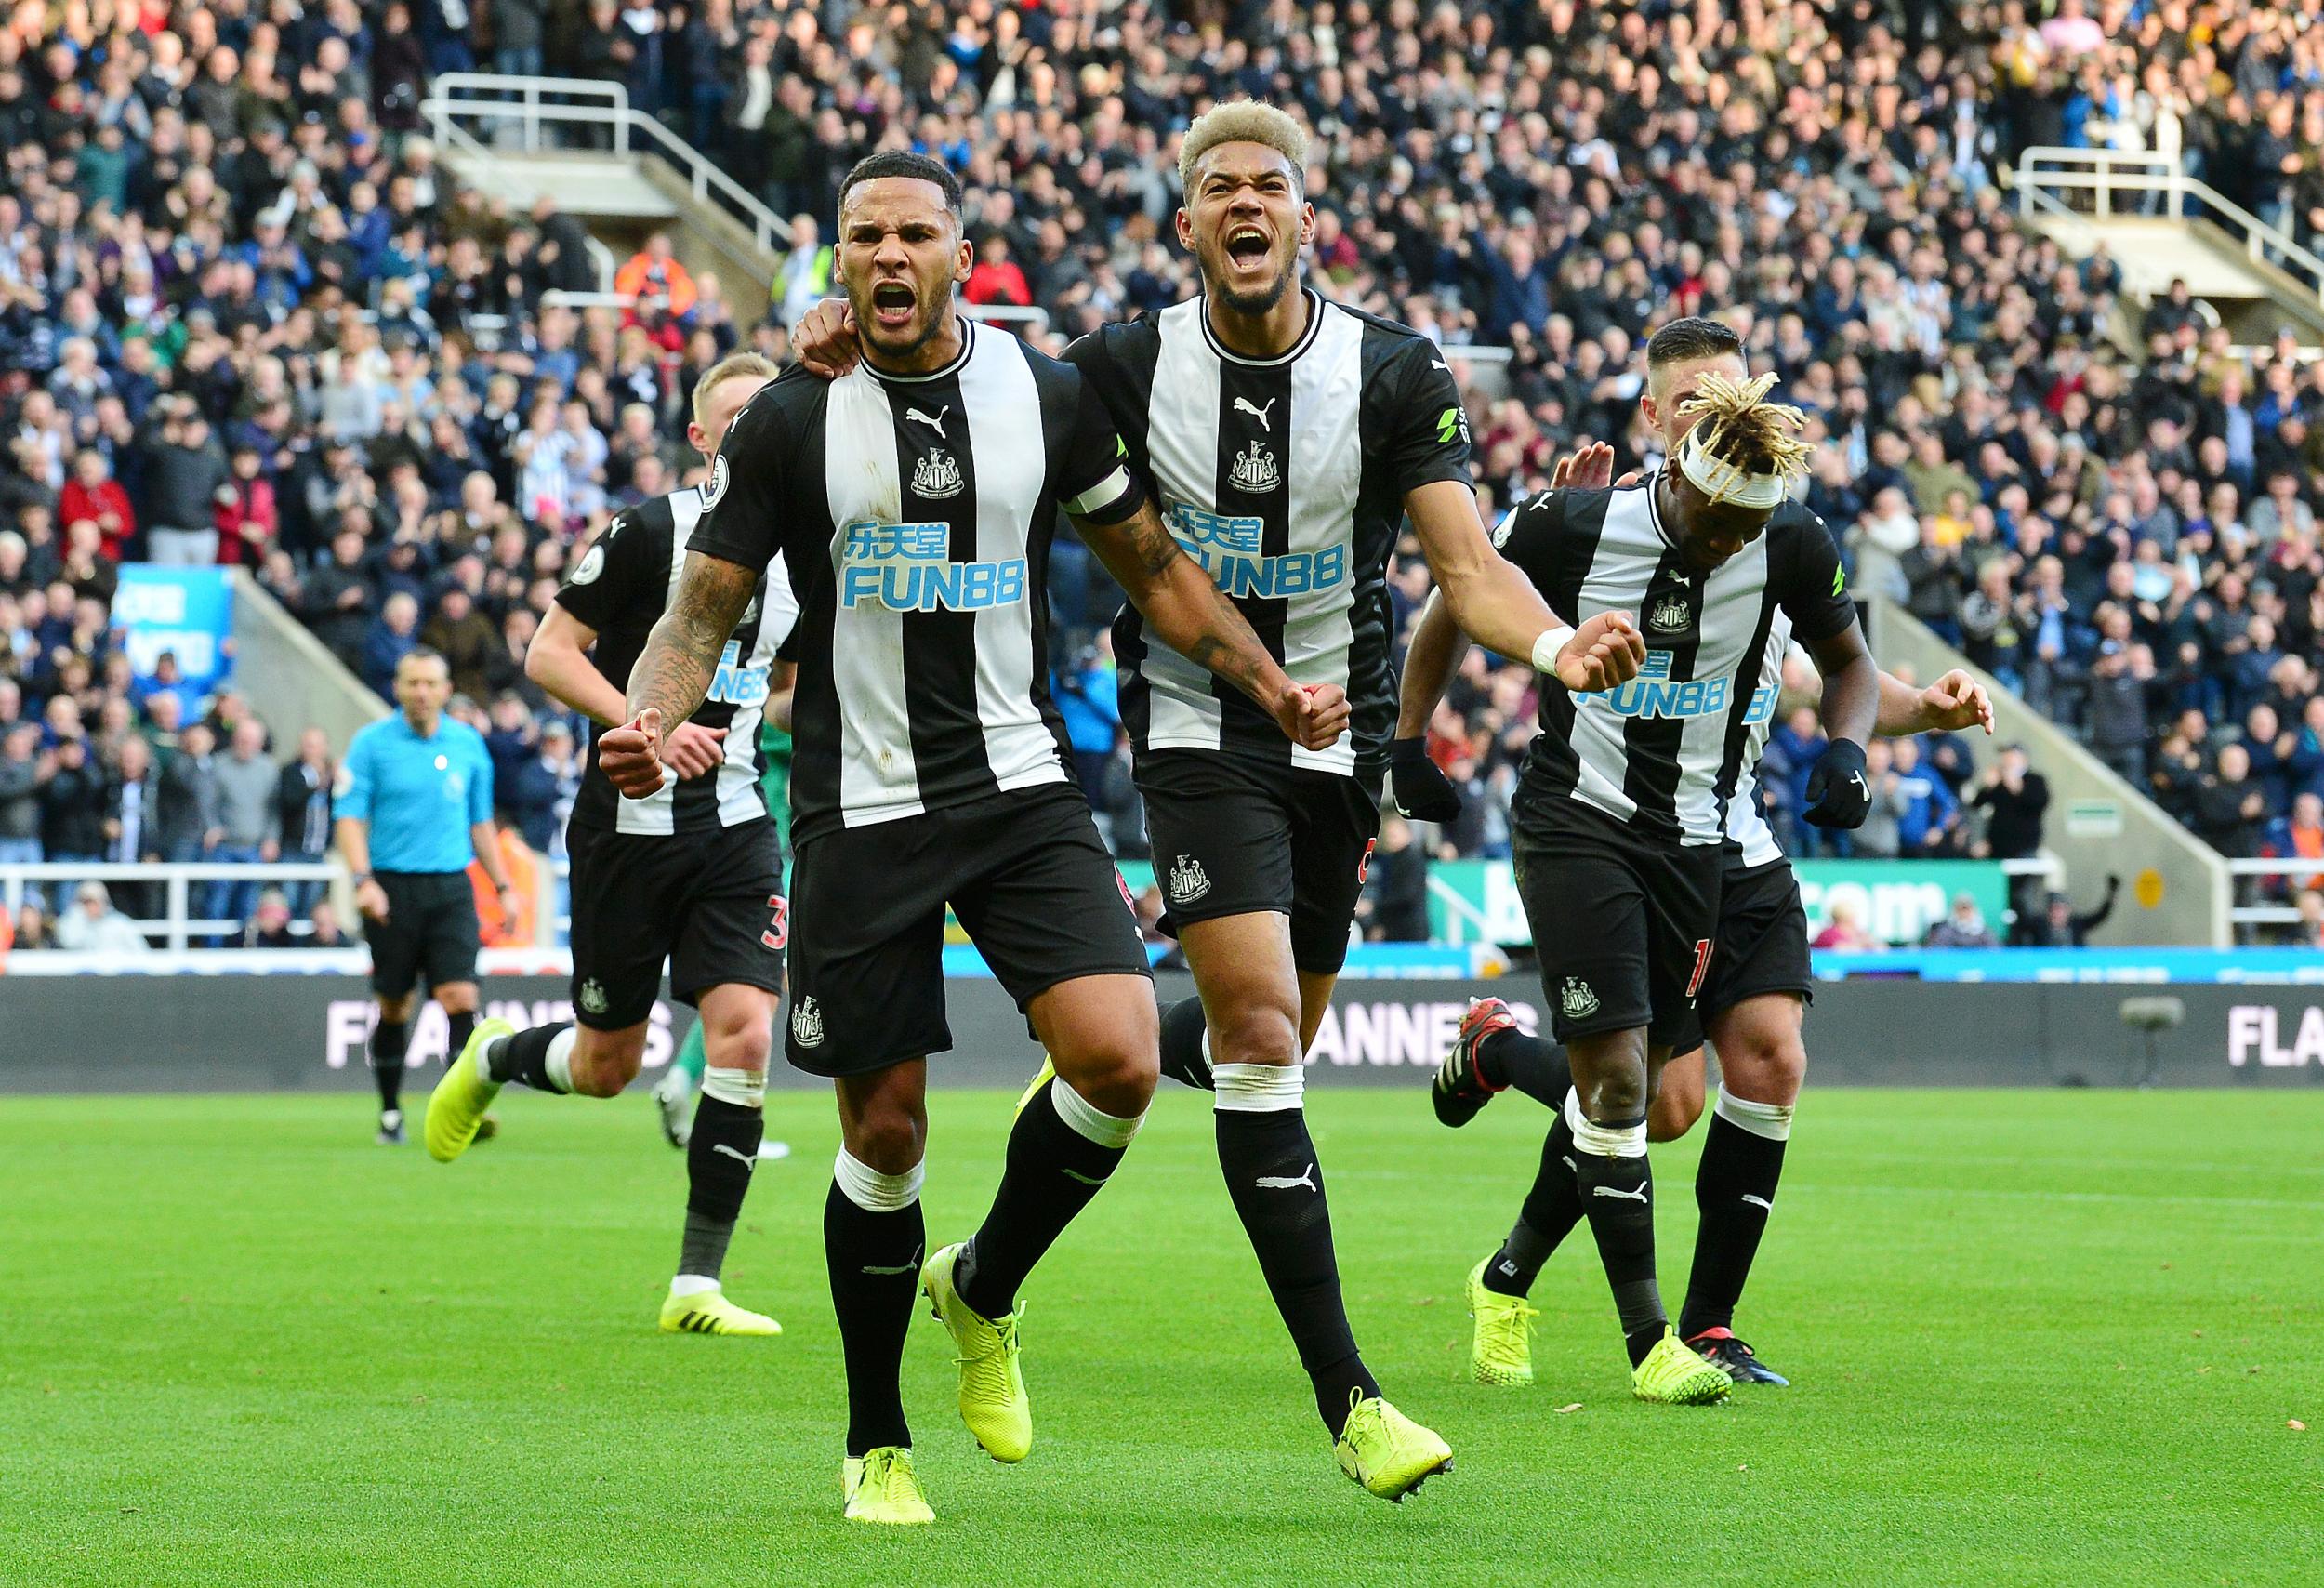 Jamaal Lascelles and Joelinton celebrate after scoring during the 2019 Premier League match between Newcastle United and Wolverhampton Wanderers